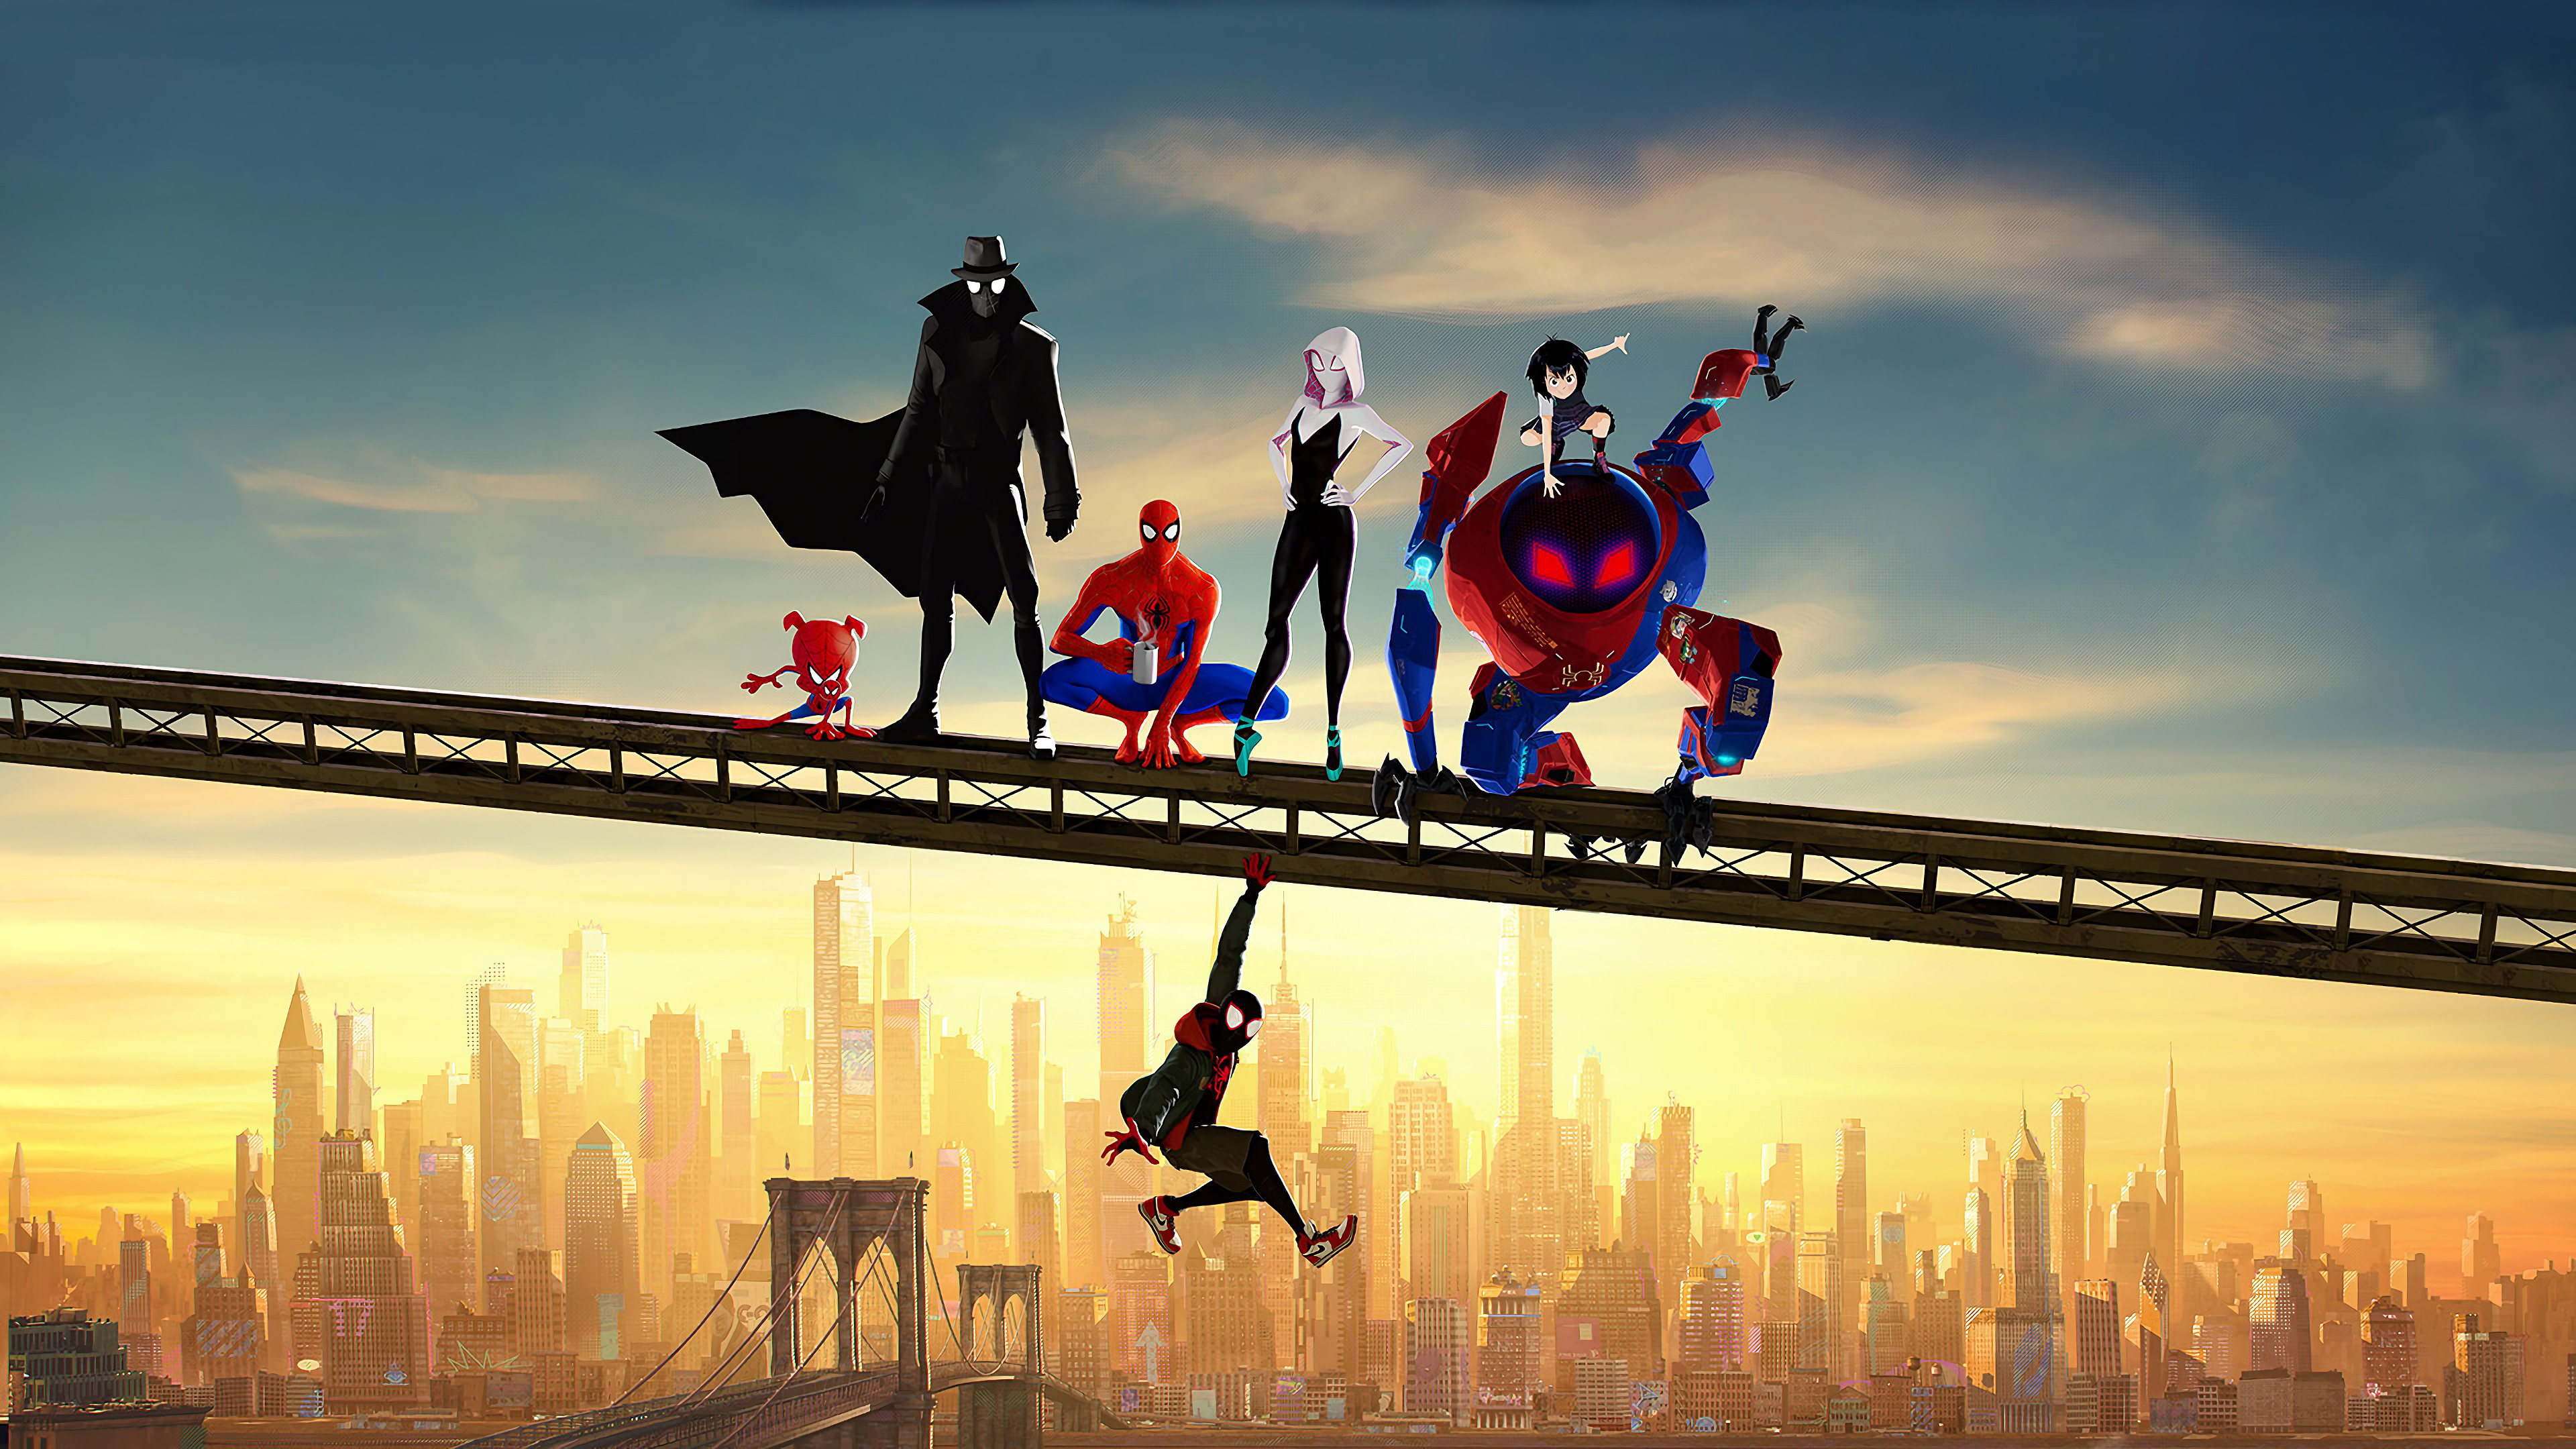 Spider-Man: Into the Spider-Verse Characters 4K Wallpaper #6